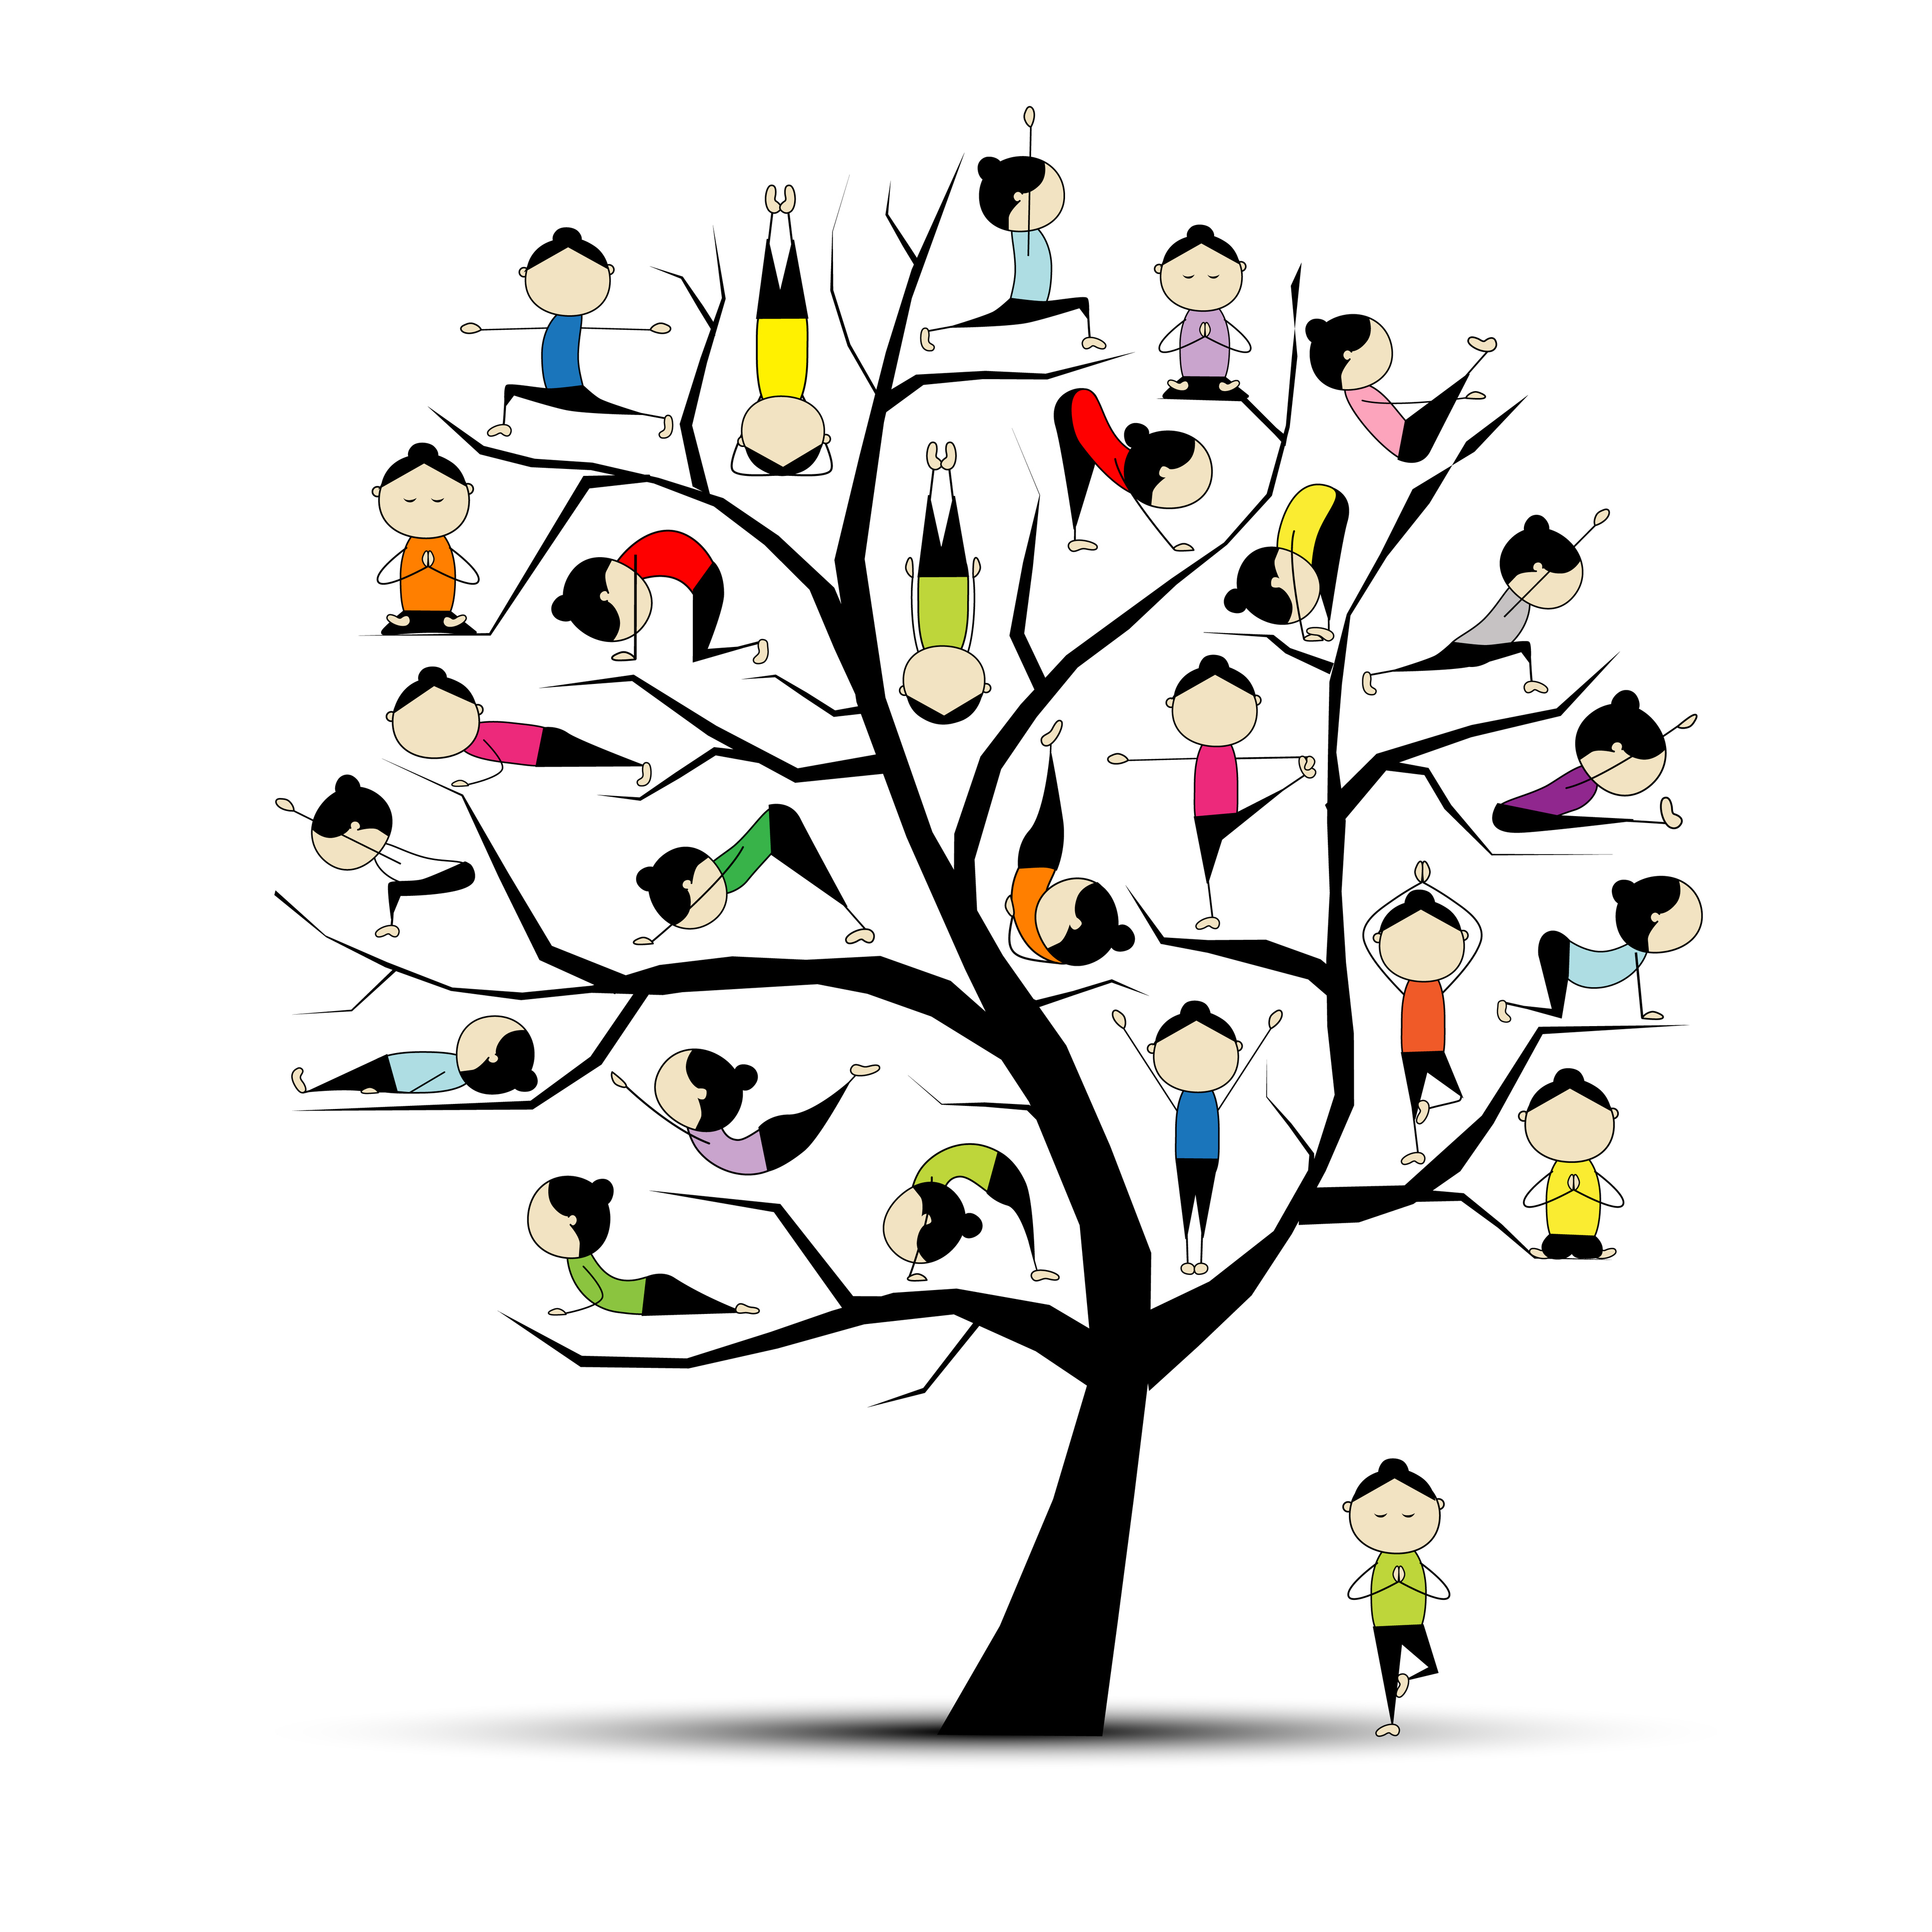 Yoga Practice Tree Concept For Your Design